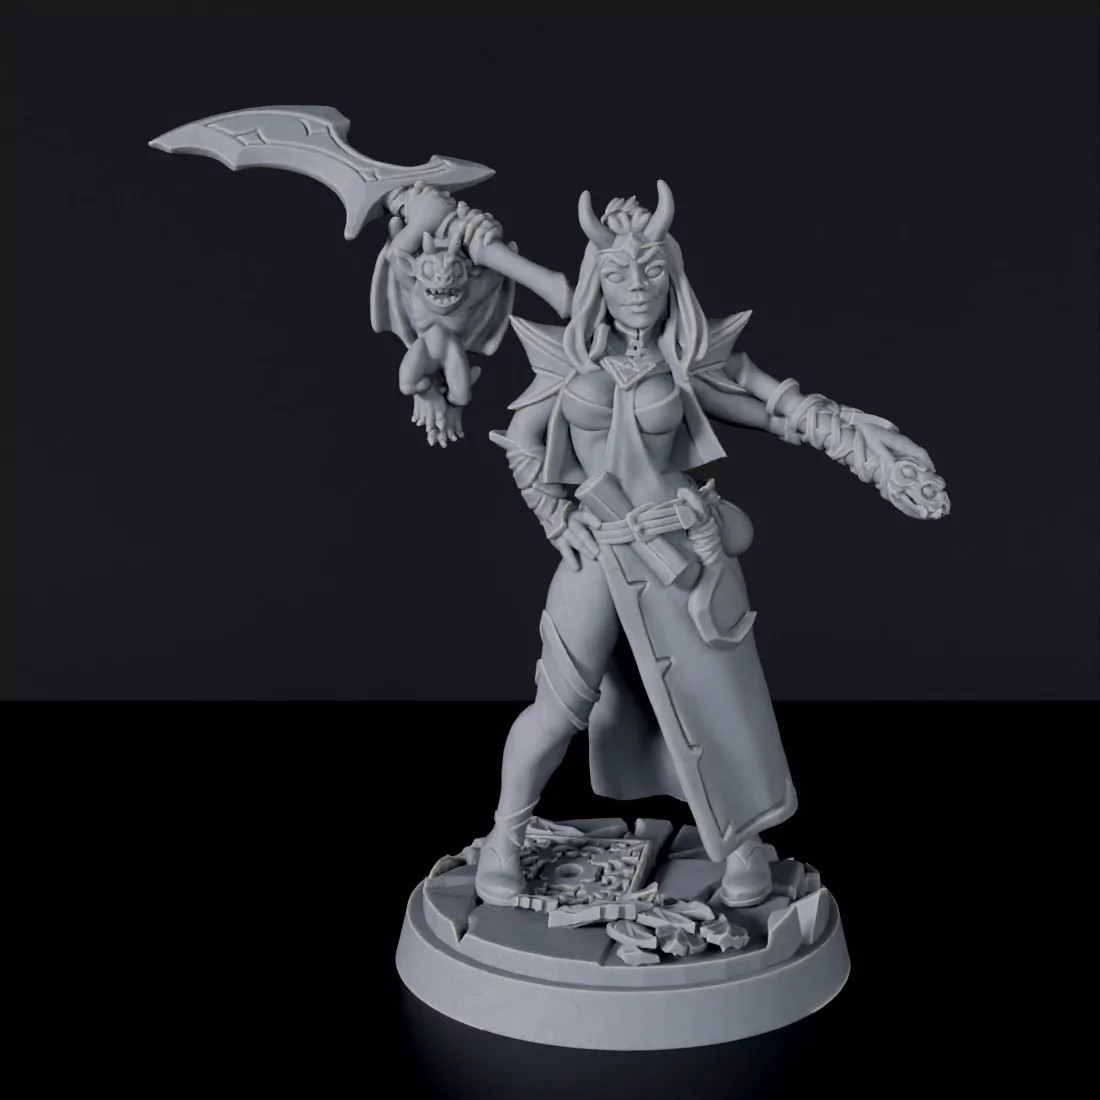 Fantasy miniature of Tiefling Female Warlock with staff and cloak for tabletop role-playing games